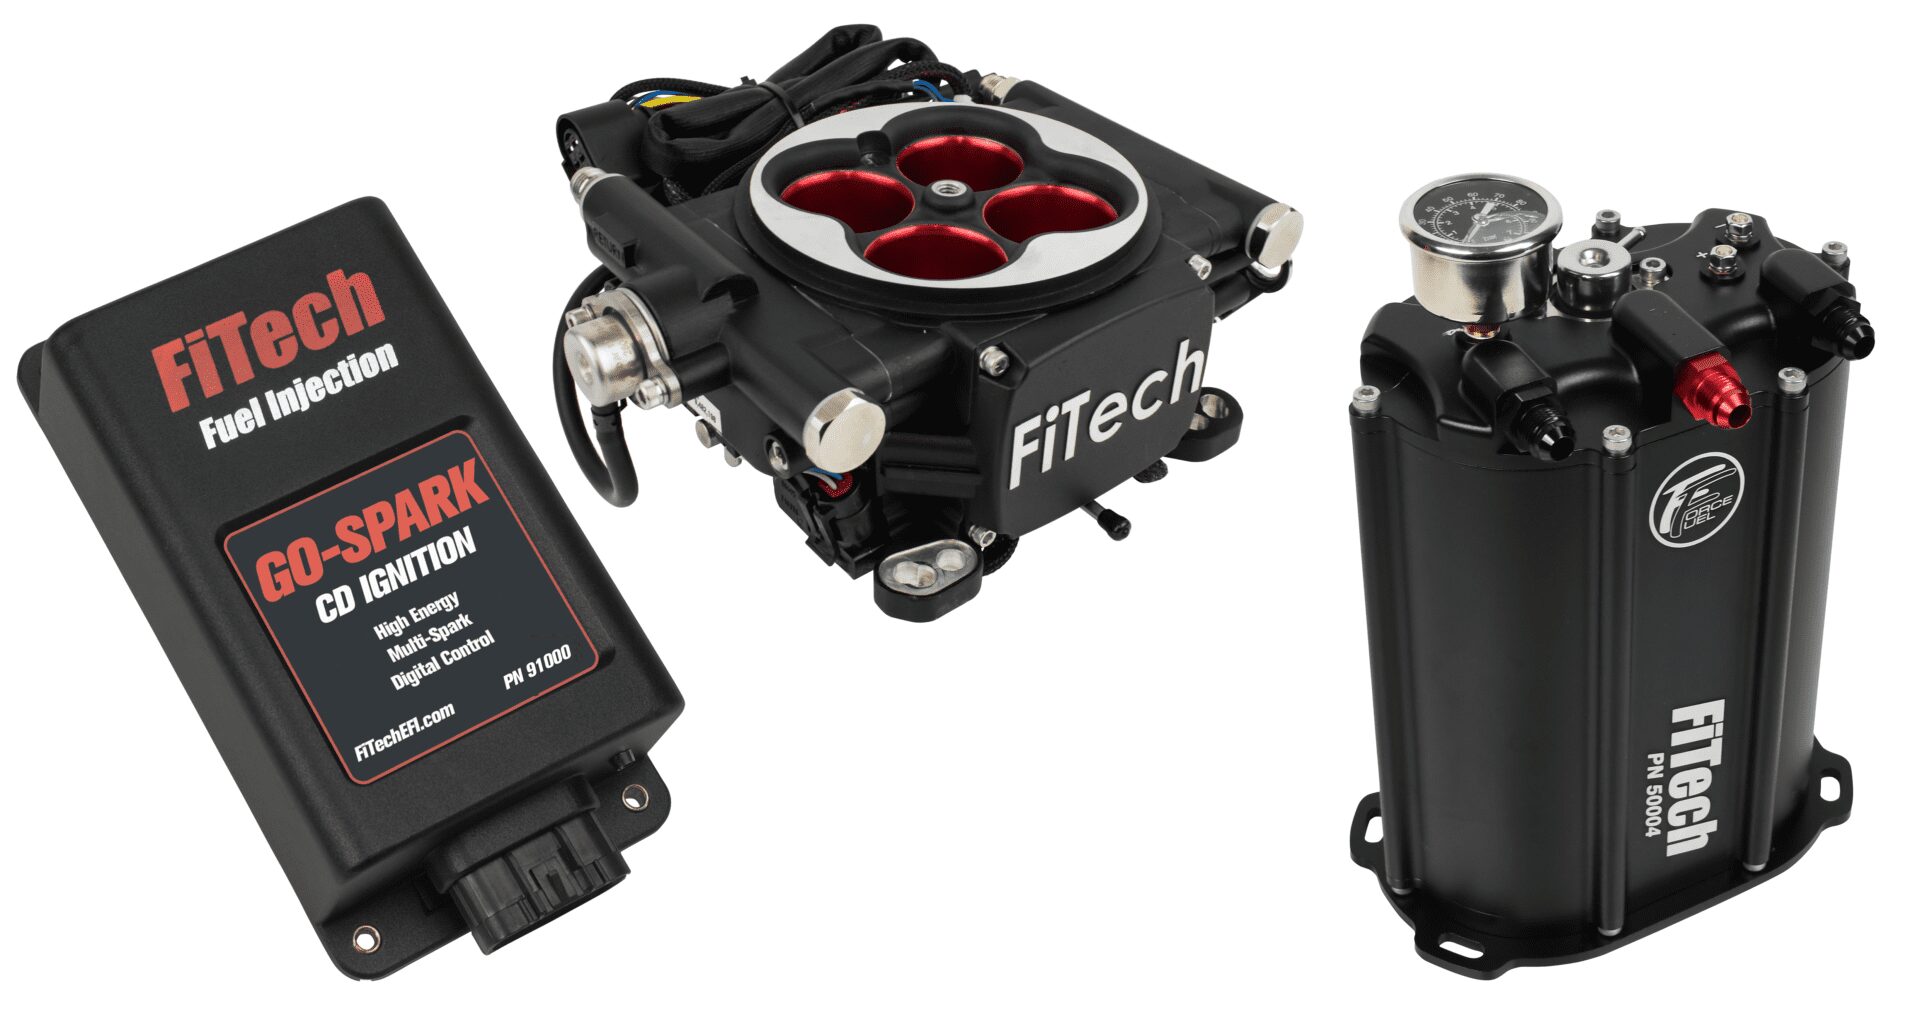 FiTech 93504 Go EFI 4 System (Power Adder) Master Kit w/ Force Fuel, Fuel Delivery System